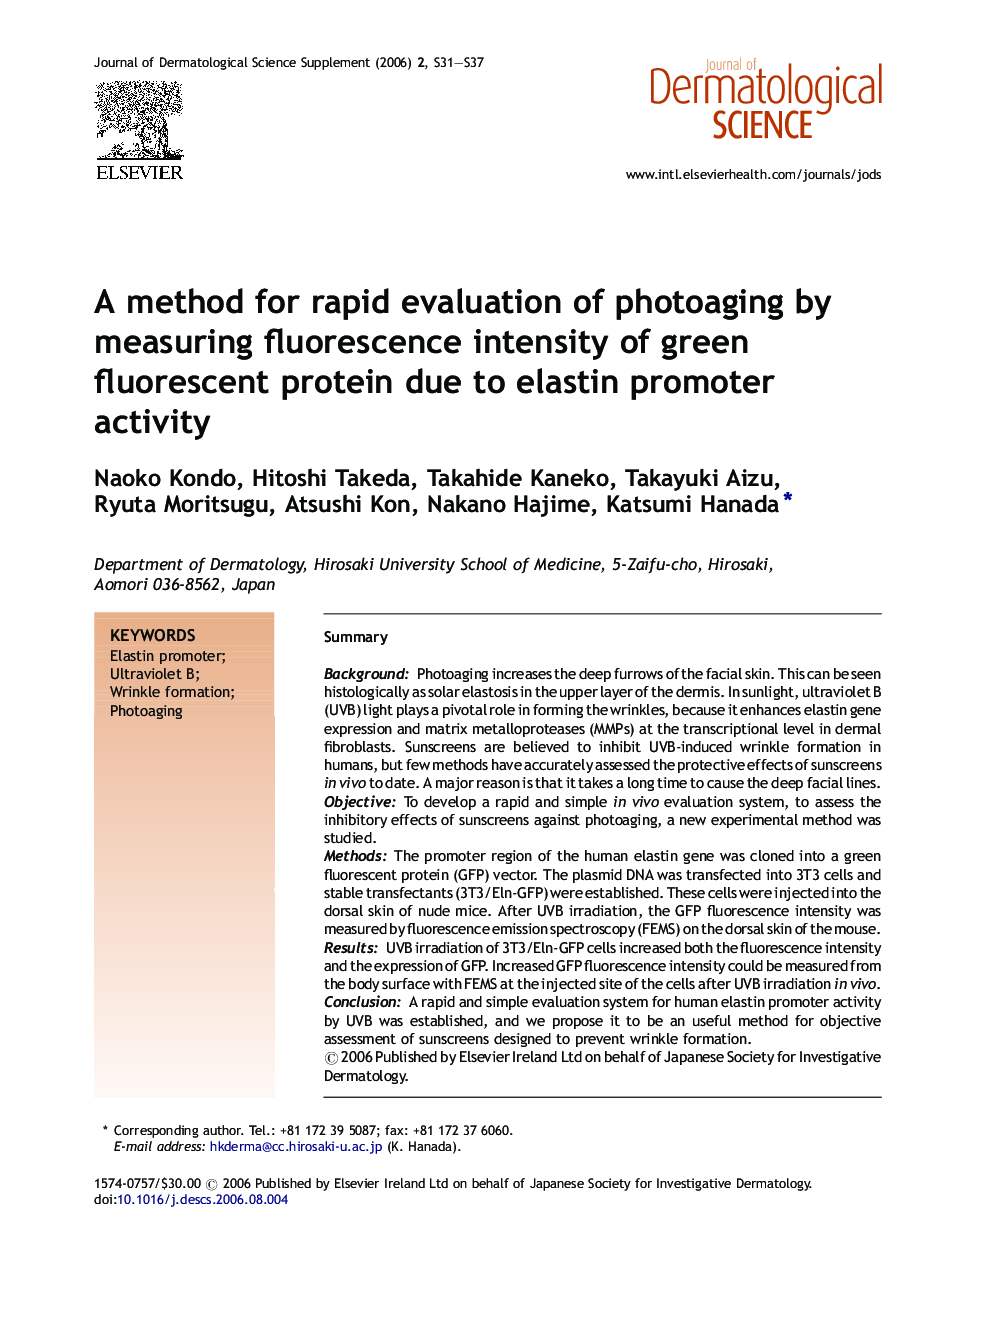 A method for rapid evaluation of photoaging by measuring fluorescence intensity of green fluorescent protein due to elastin promoter activity